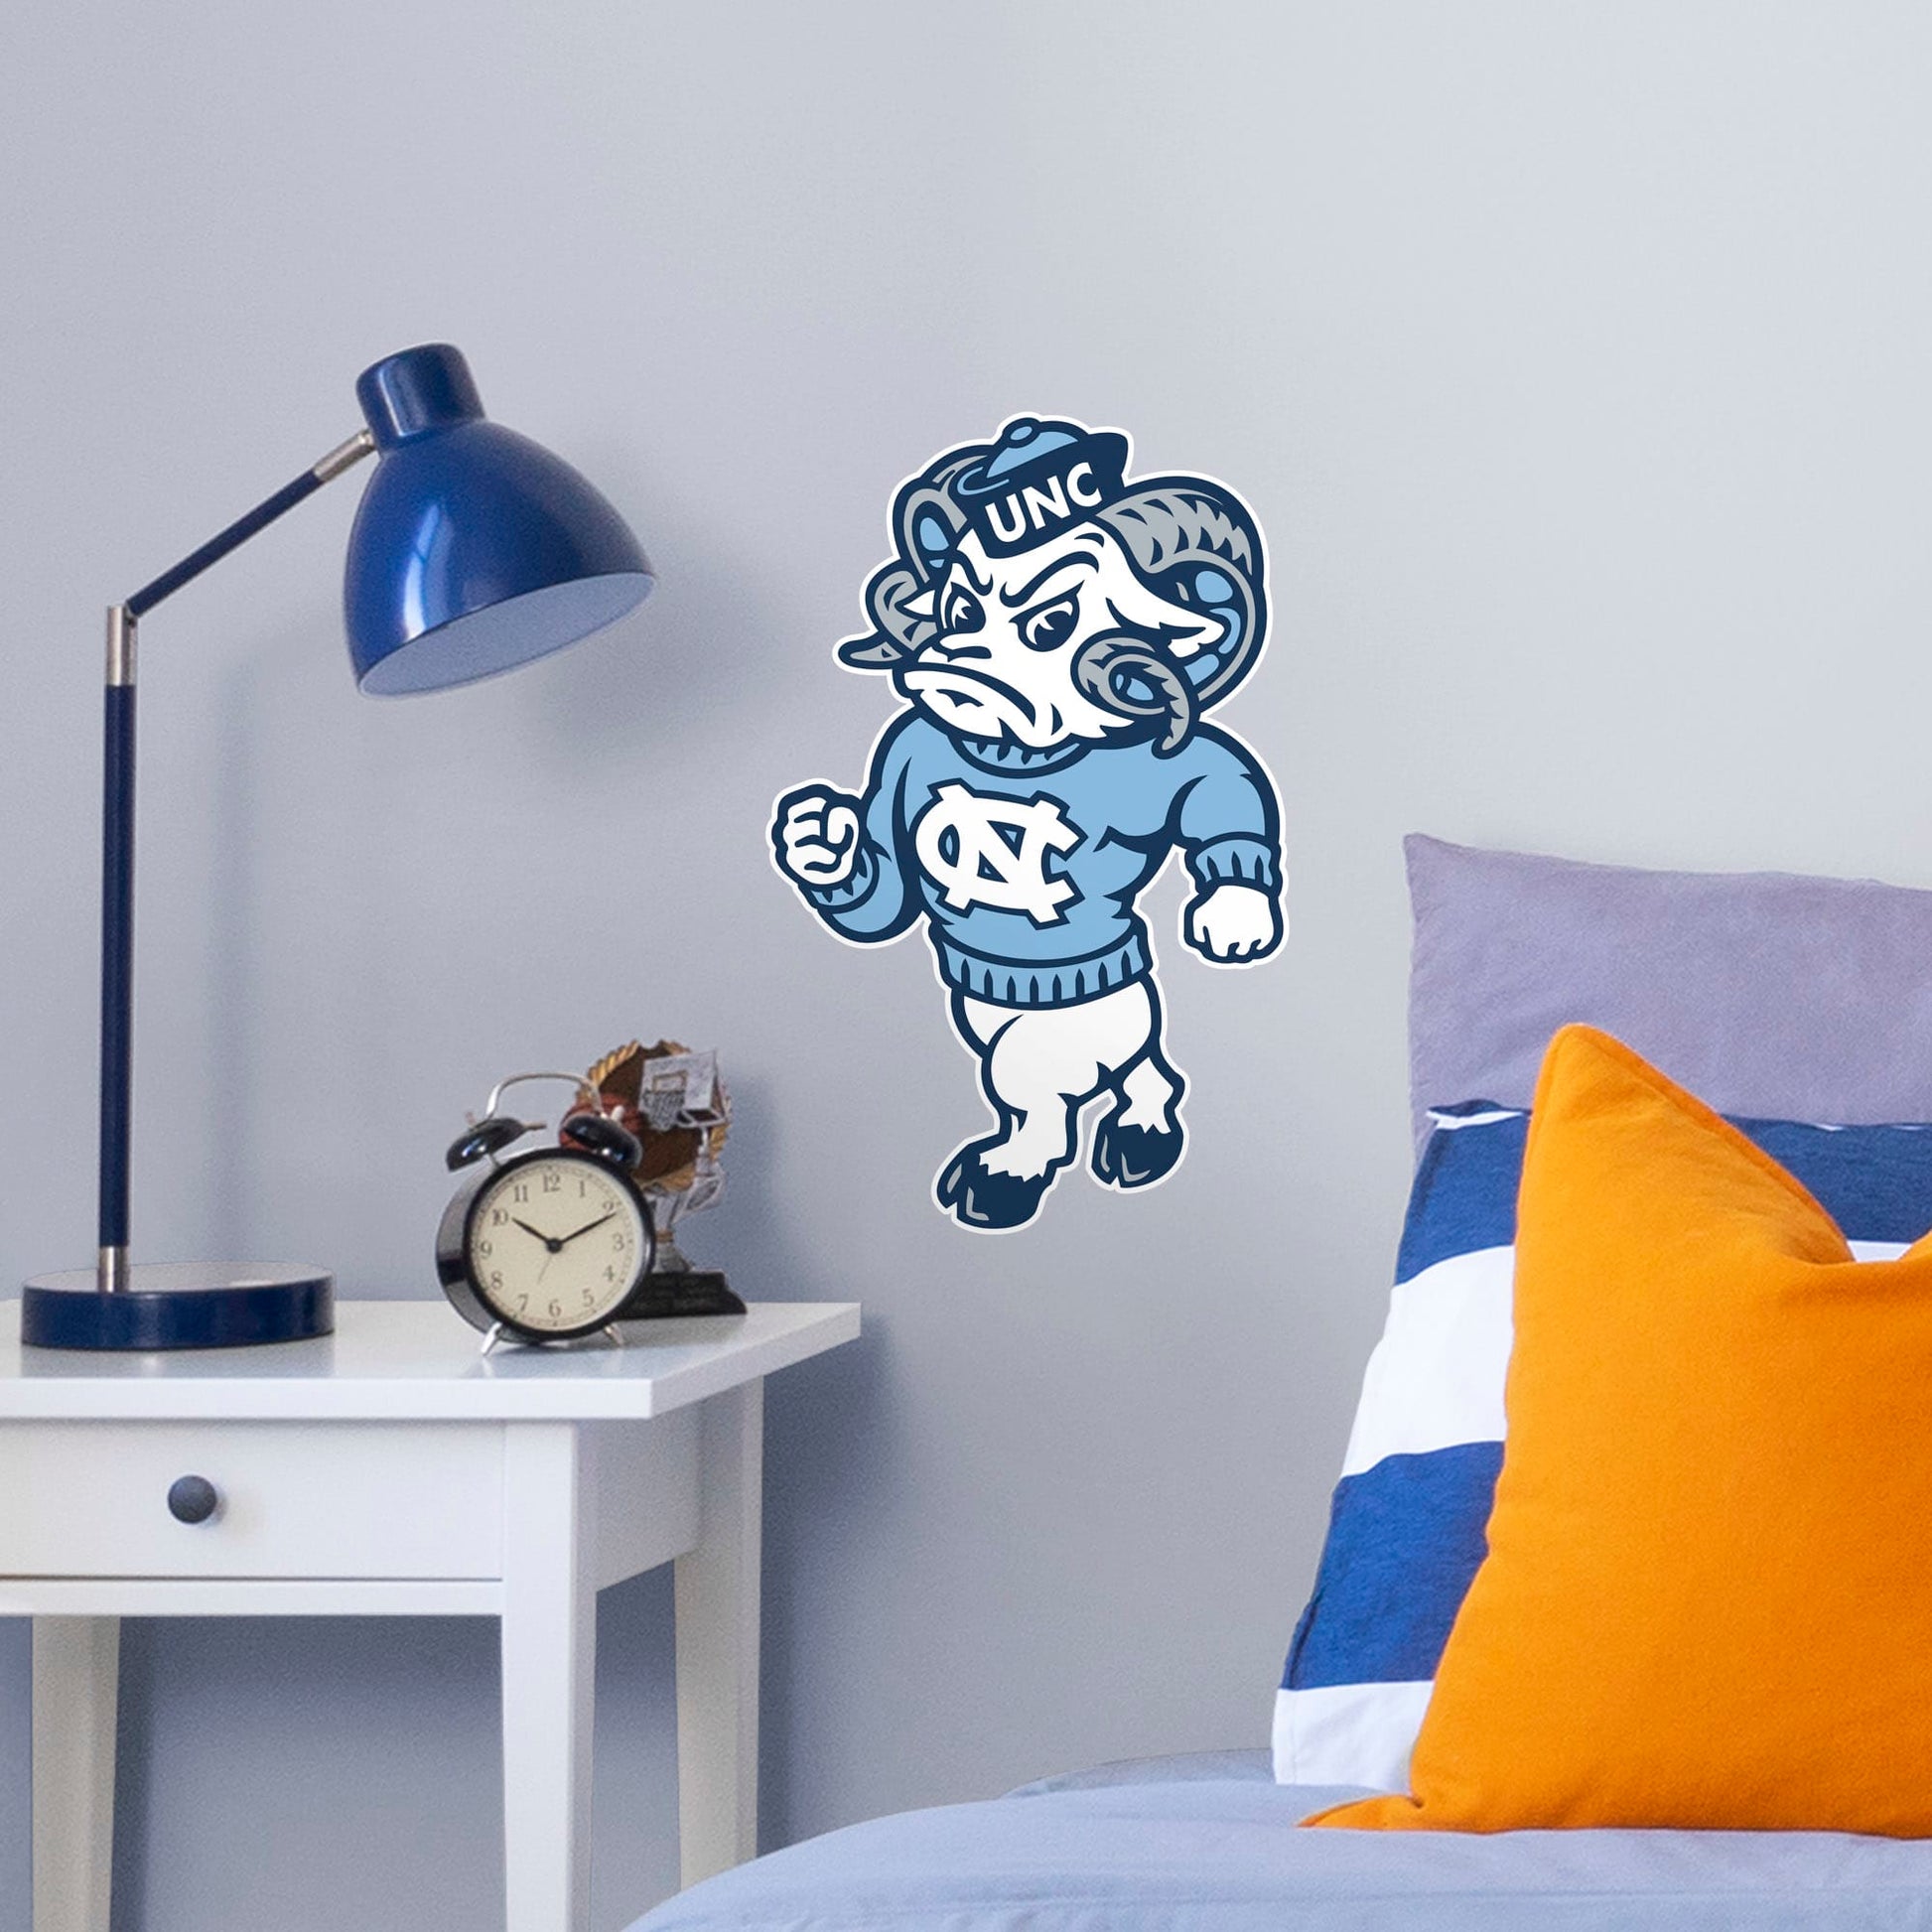 Large Mascot + 2 Decals (11"W x 17"H)